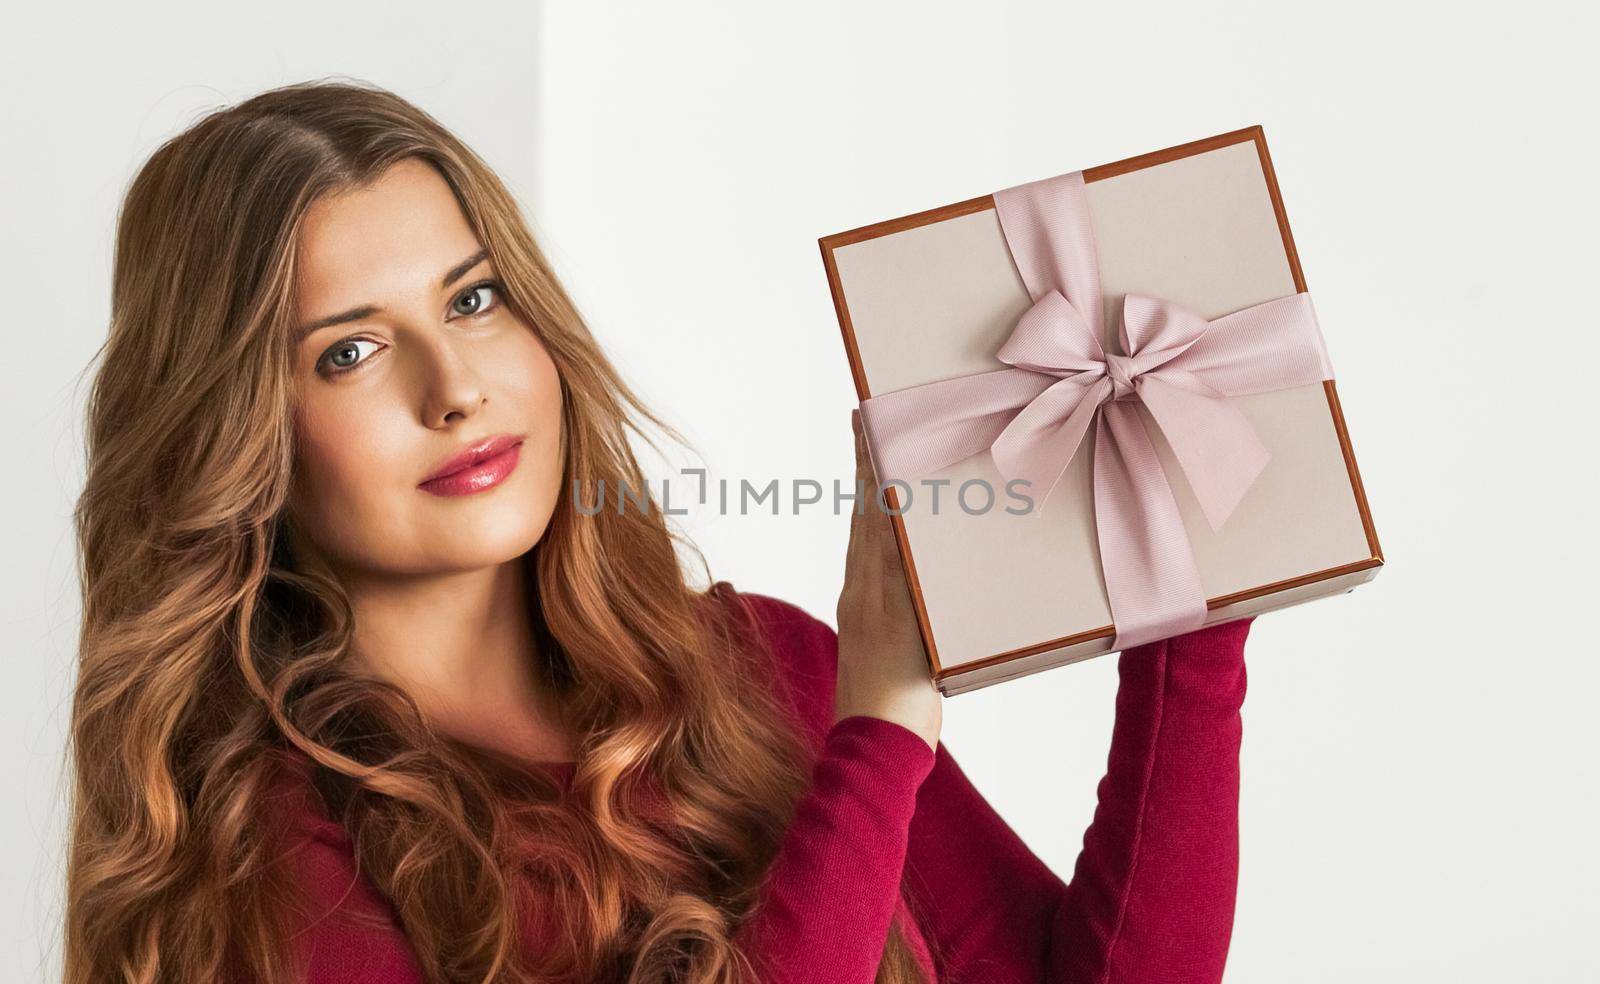 Holiday present for birthday, baby shower, wedding or luxury beauty box subscription delivery, happy woman holding a wrapped pink gift by Anneleven